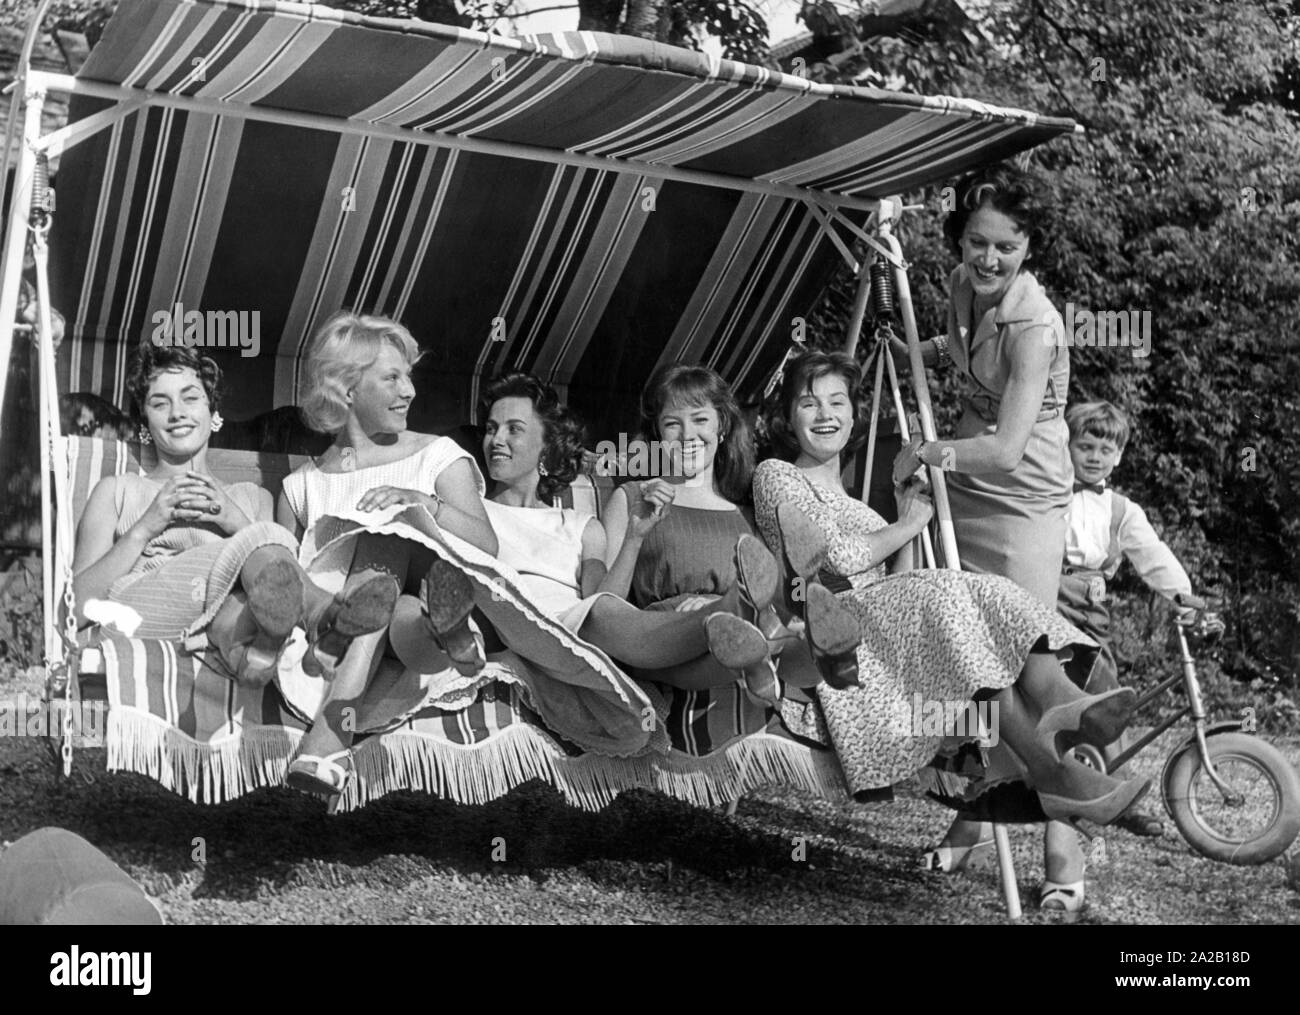 Actress Ada Tschechowa (right) introduces five young actresses at a garden party. From left: daughter Vera, Anette, Dorit, Carola and Ute. The boy on the right is Vera's son Nikolaus Glowna. Stock Photo